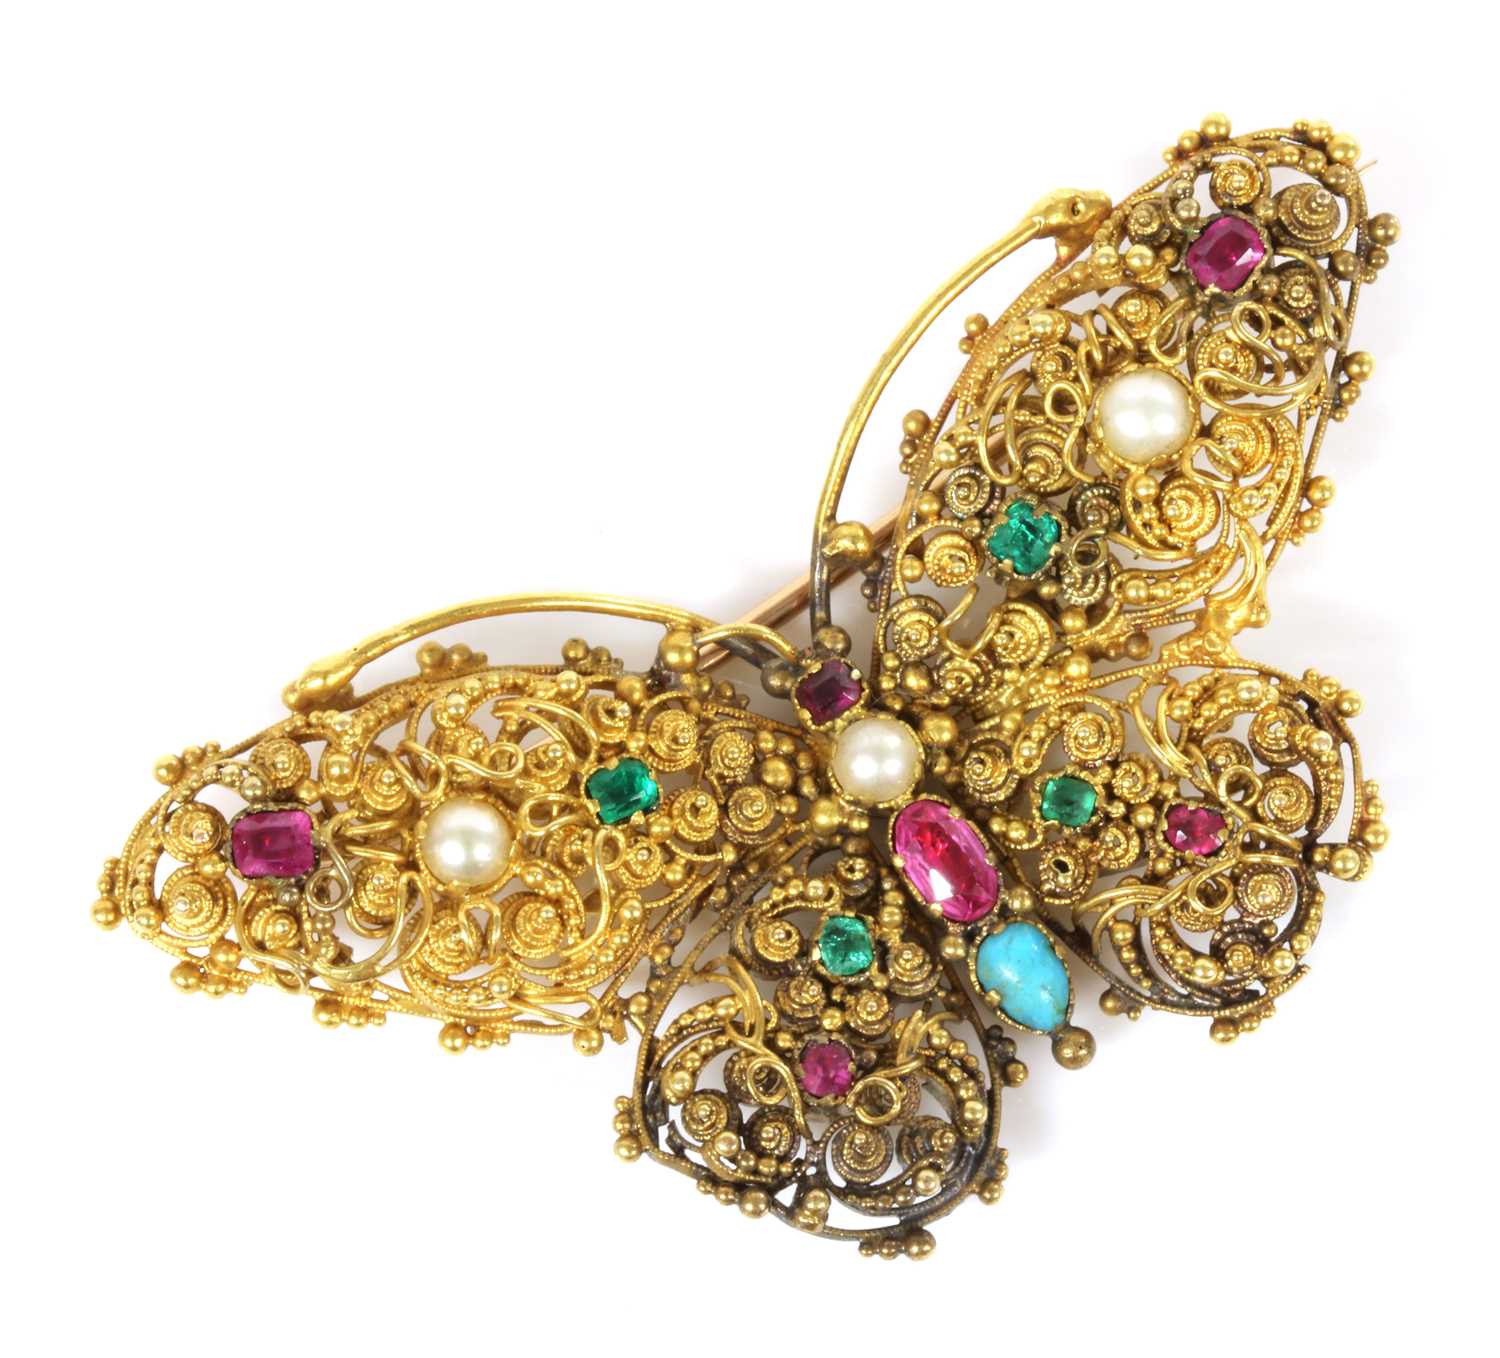 Lot 18 - A Regency gold, gemstone and pearl butterfly brooch, c.1820